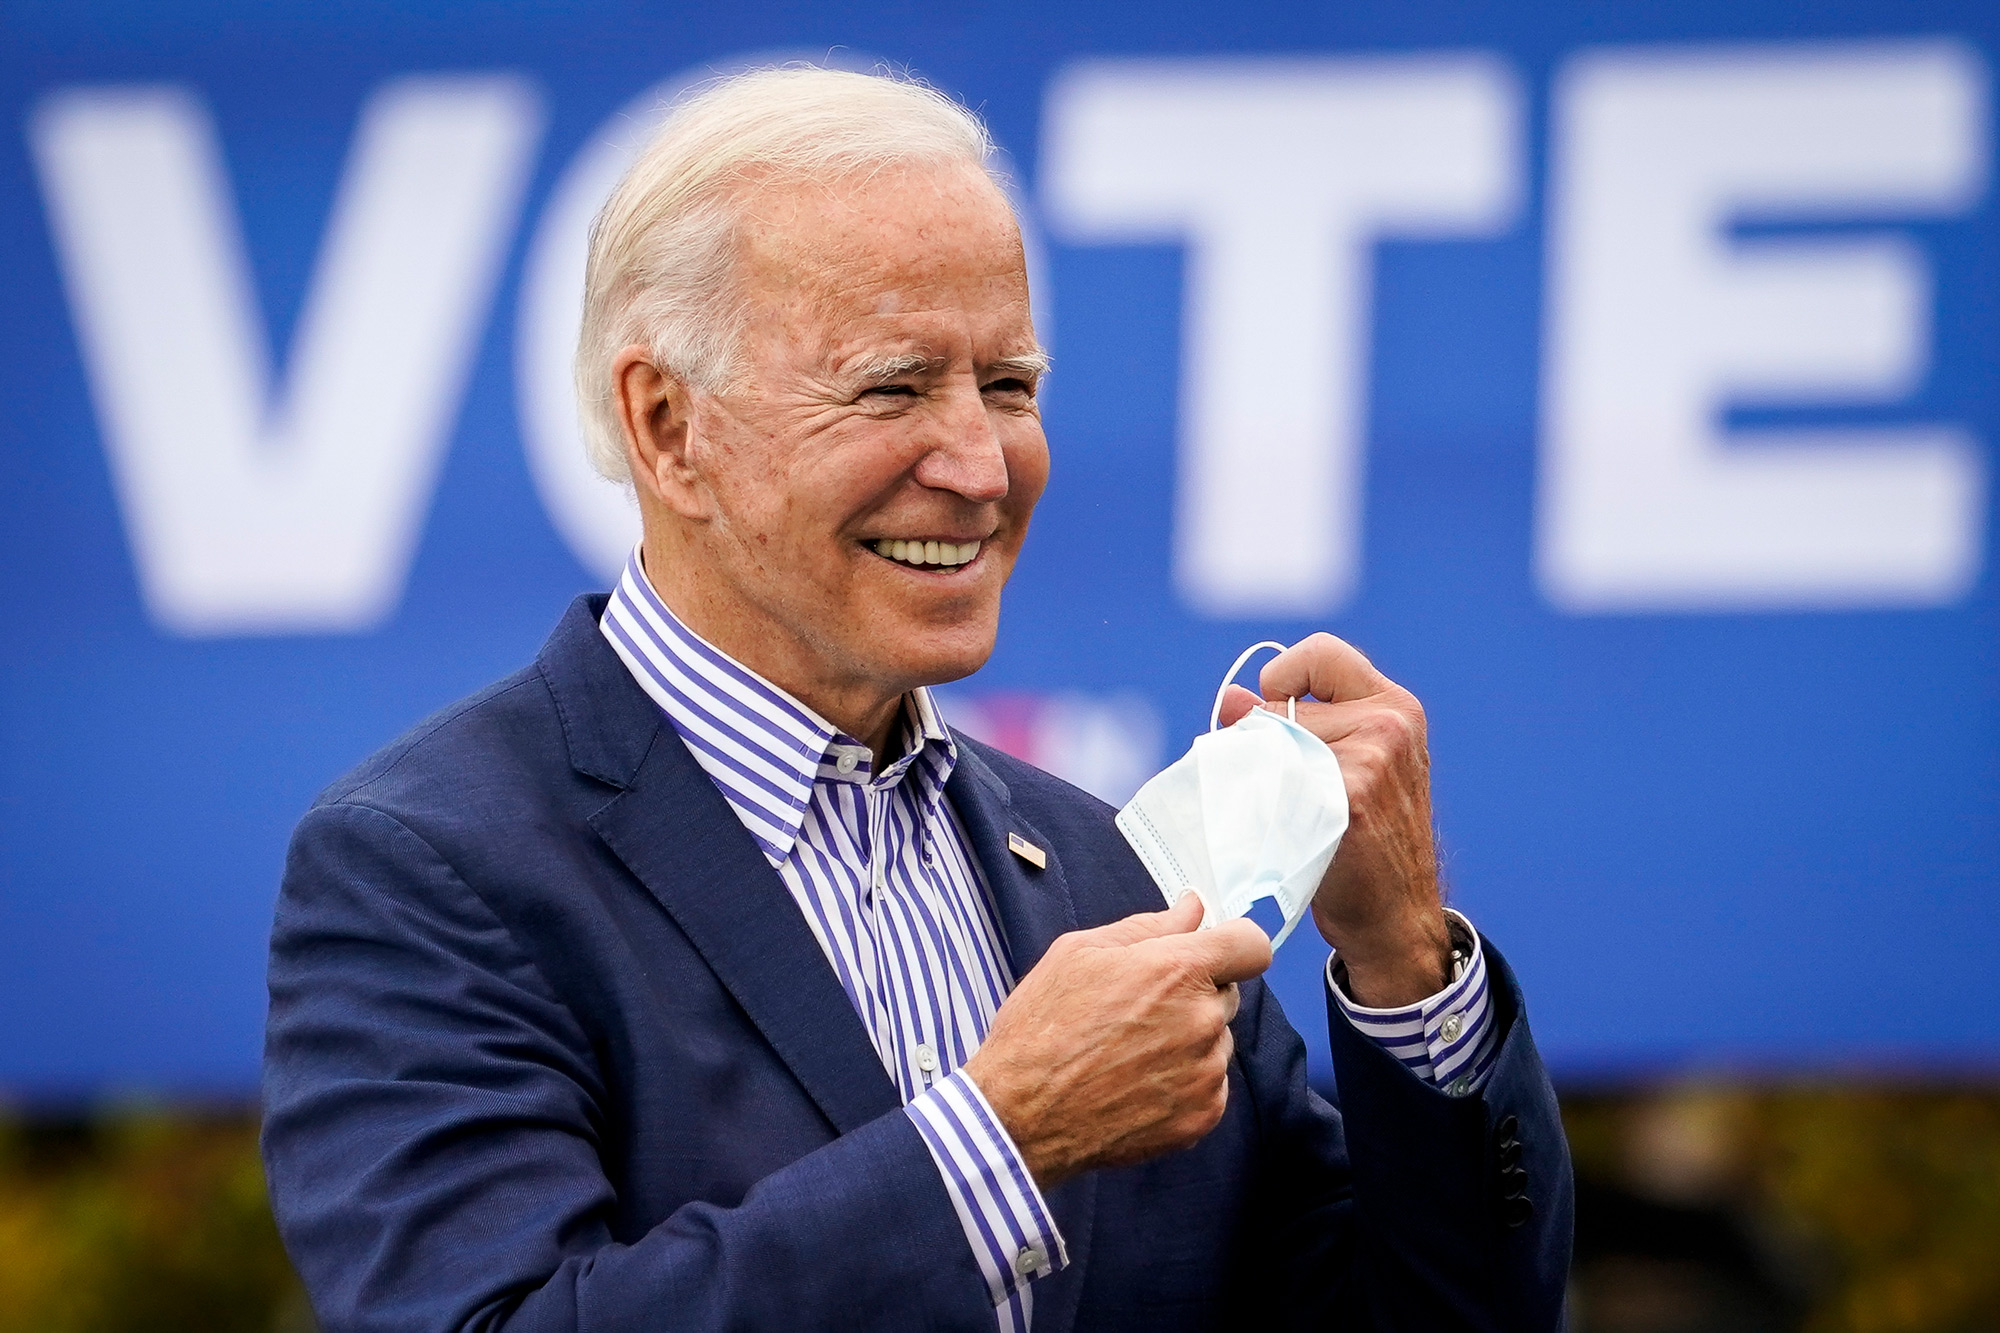 Democratic presidential nominee Joe Biden takes off his face mask to speak during a drive-in campaign rally at Bucks County Community College on October 24 in Bristol, Pennsylvania. 